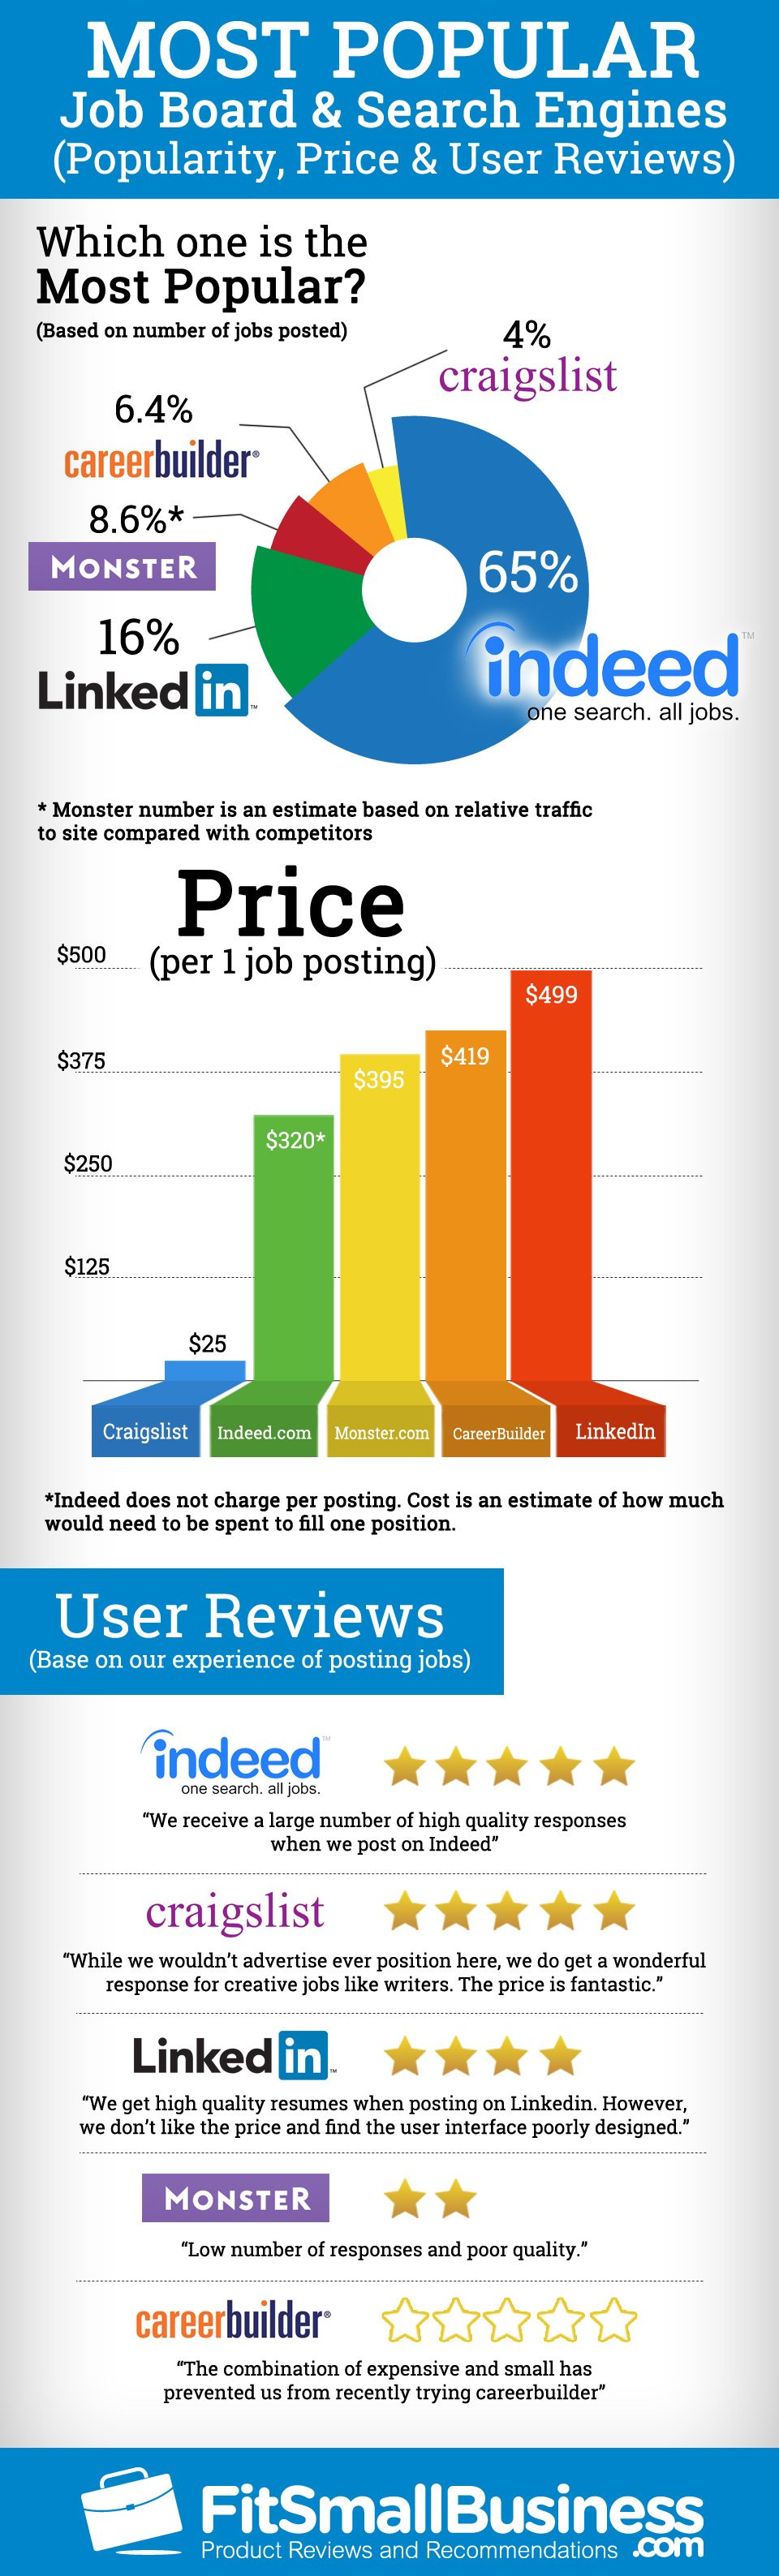 Job Boards - Price, Popularity, and User Reviews Infographic